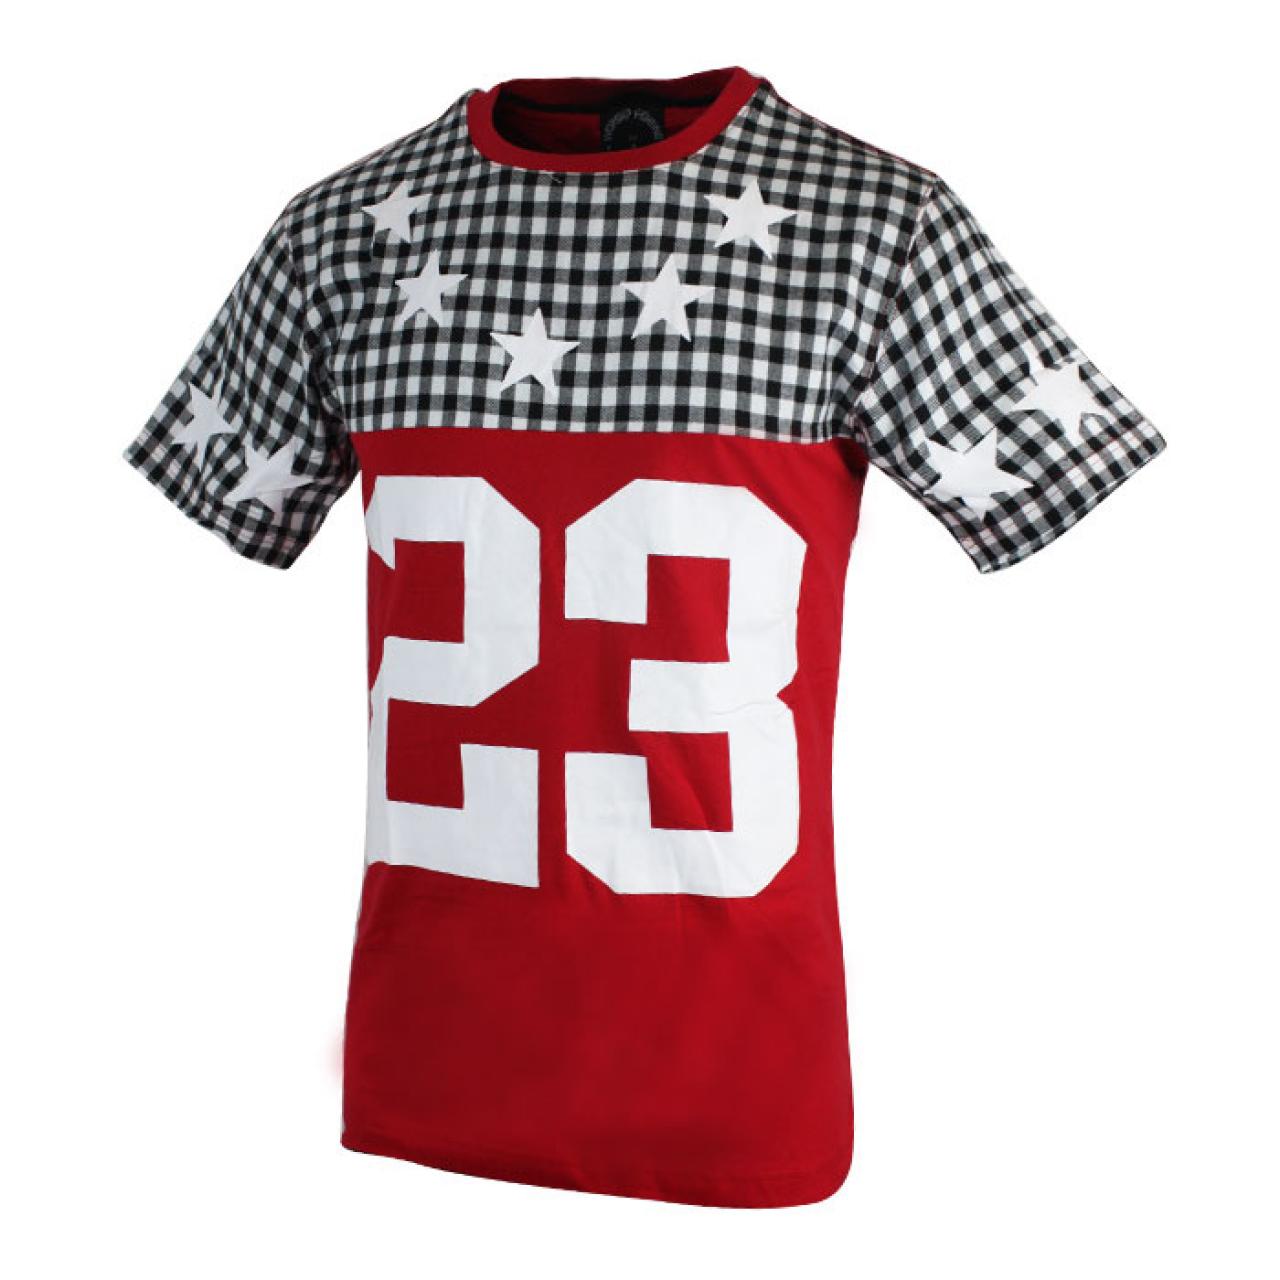 Men's Sports T Shirt Design Red With Black And White Checked